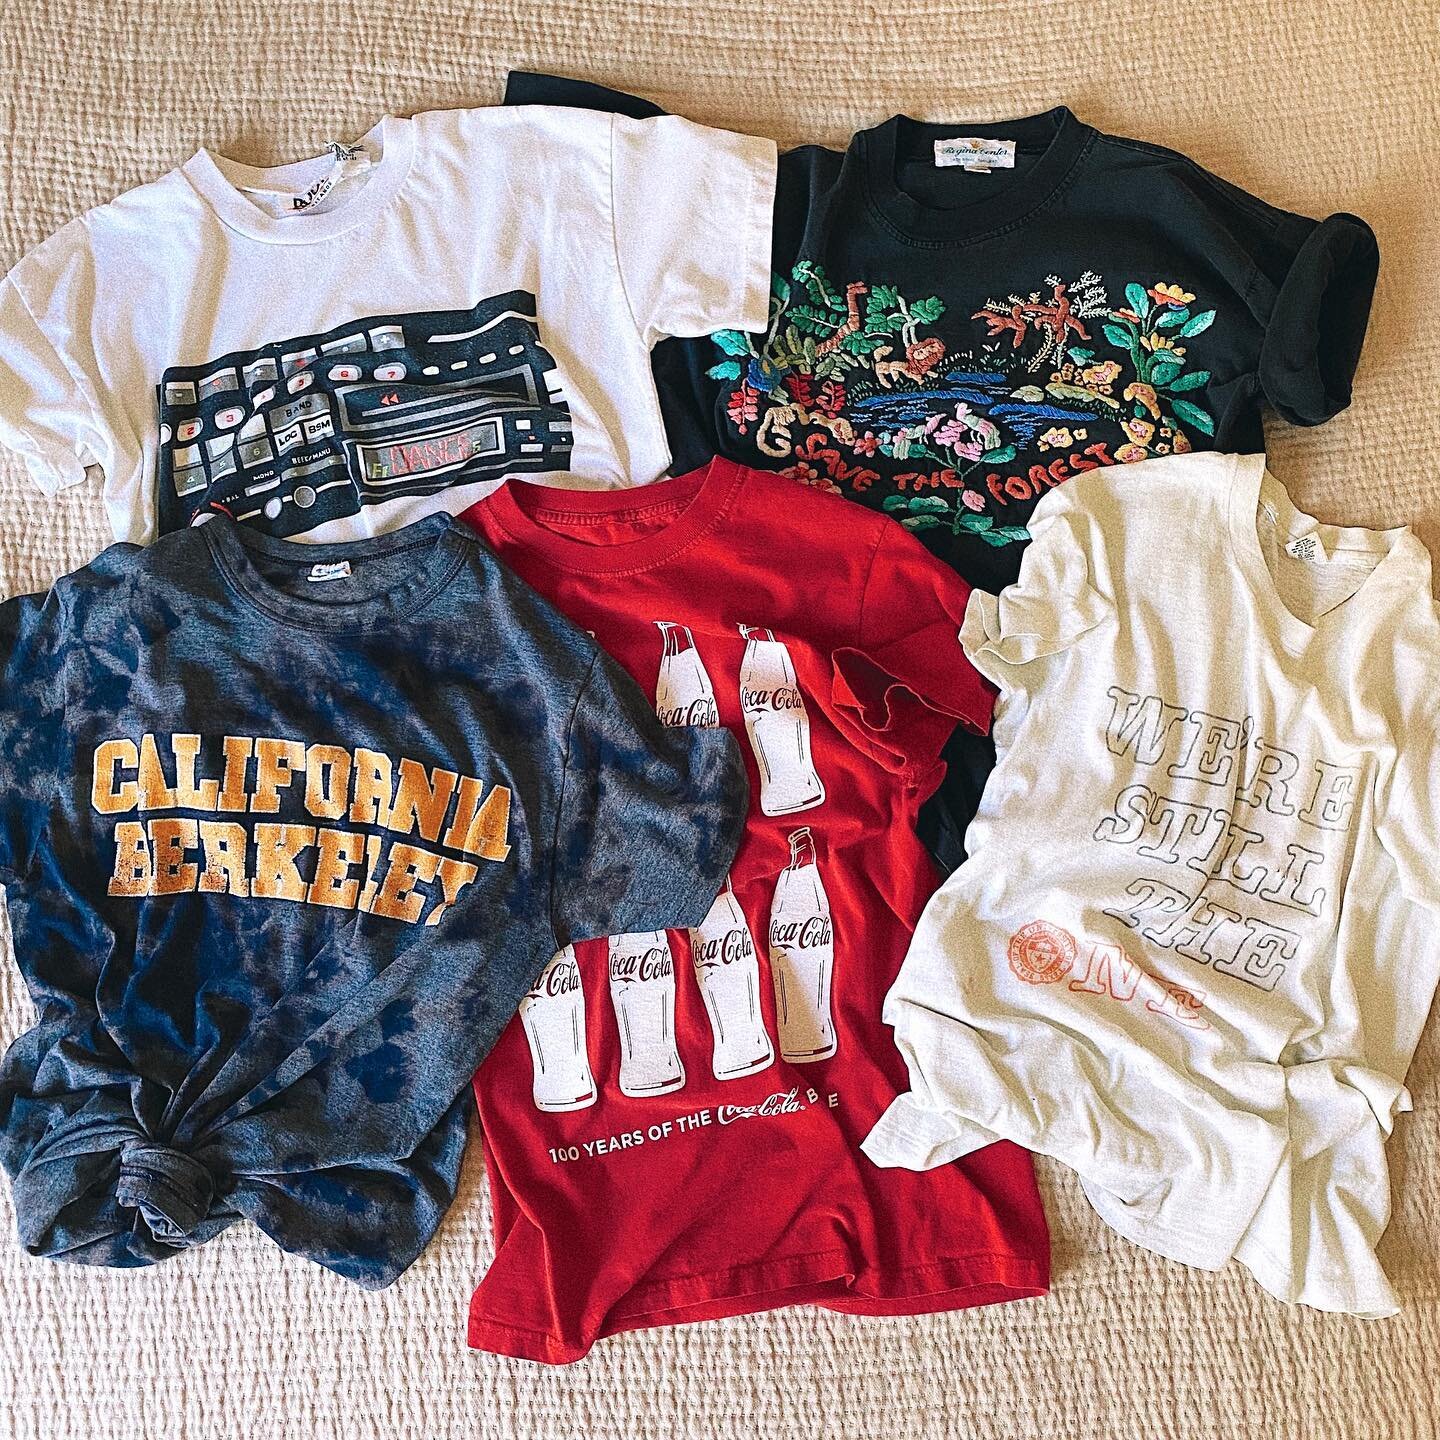 Vintage Tee story sale coming at you ~ Thursday at 6pm ⚡️